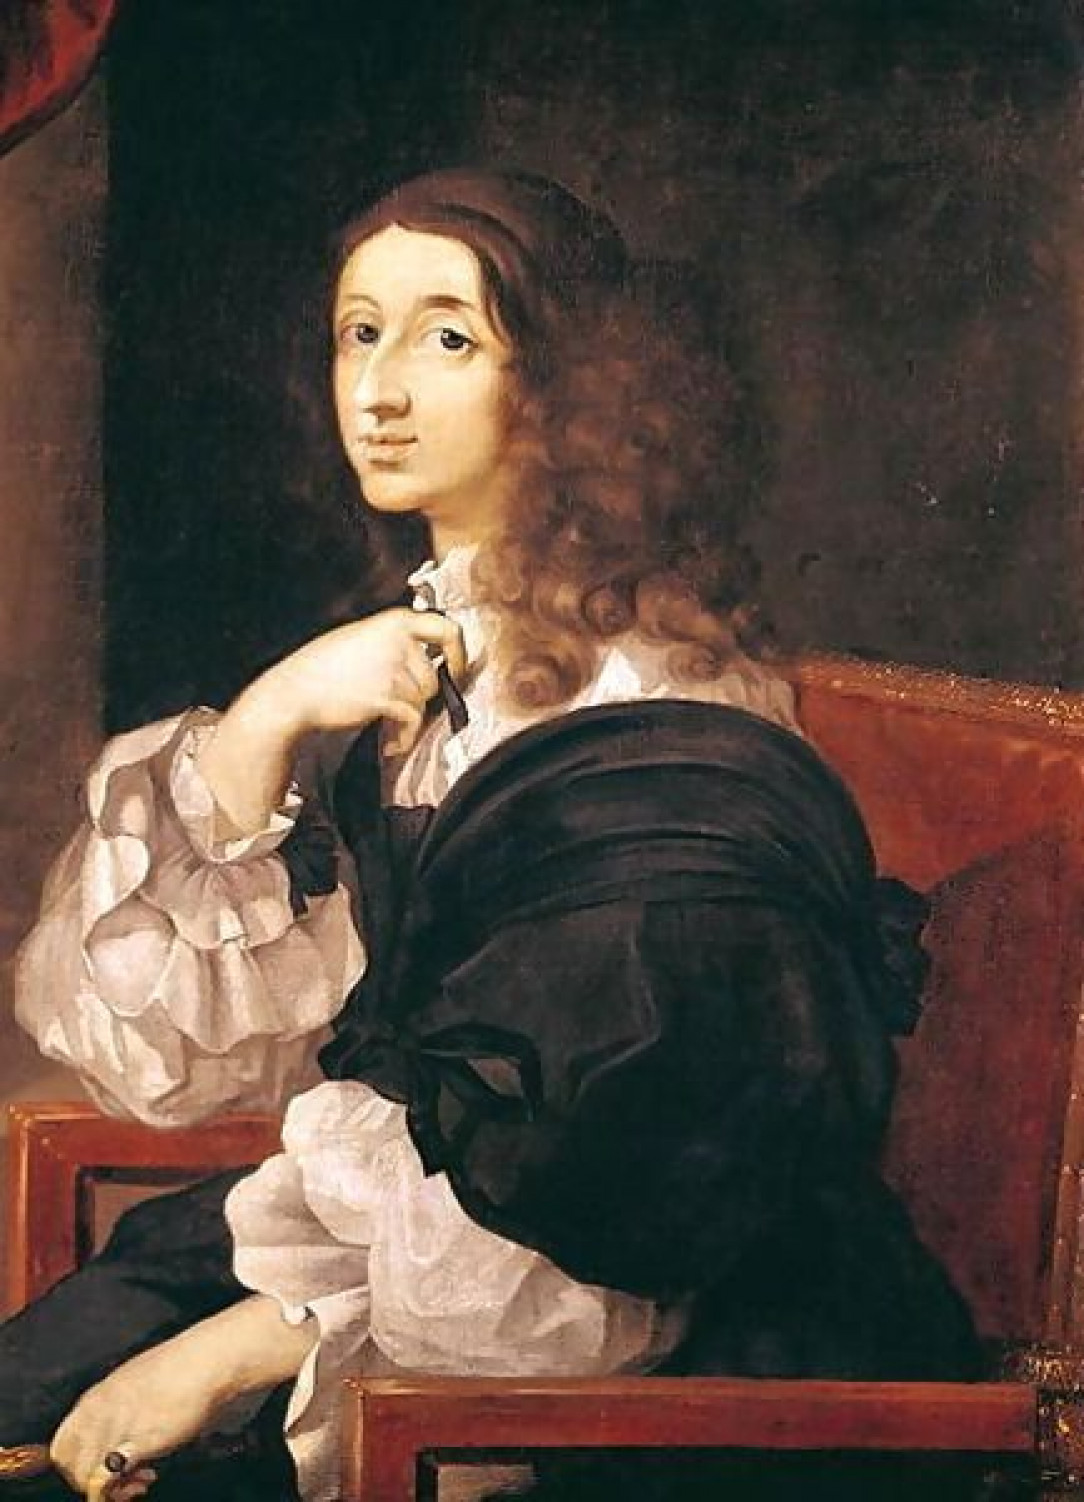 Queen Christina of Sweden, in 1654 like now she had to abdicate from the throne because she converted to the Catholic faith